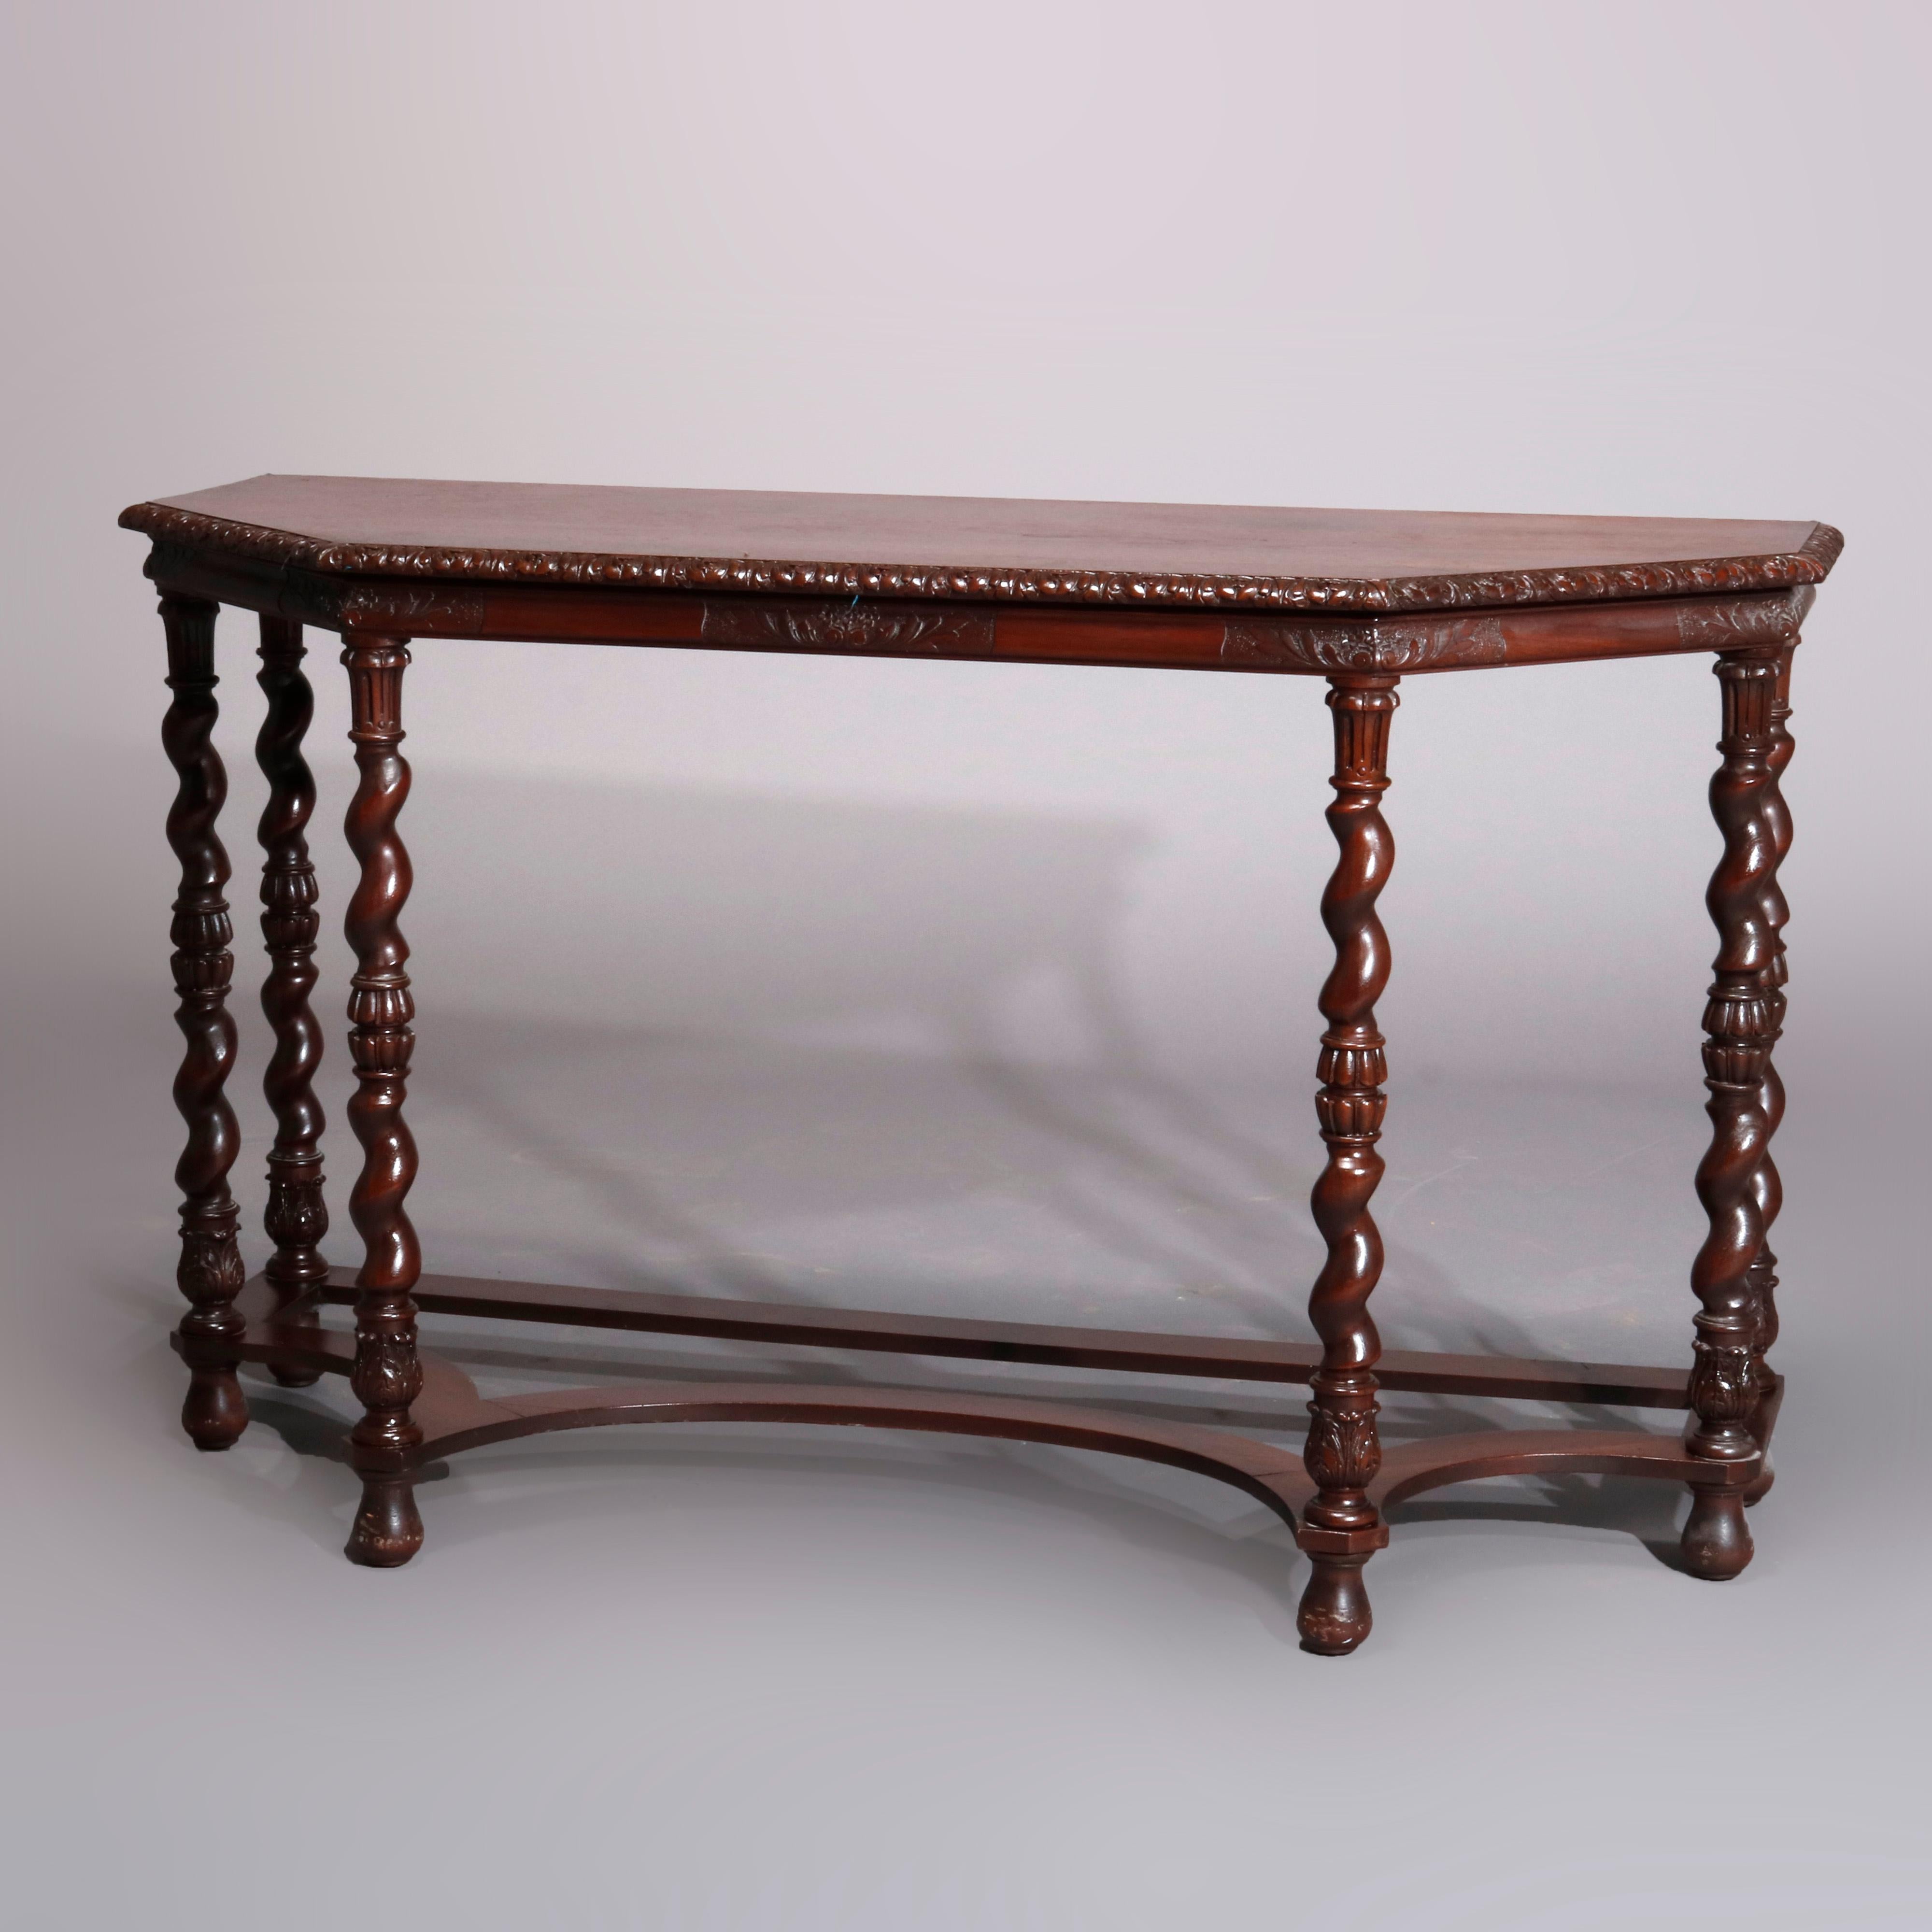 English Antique Elizabethan Carved Mahogany Barley Twist and Acanthus Console Table